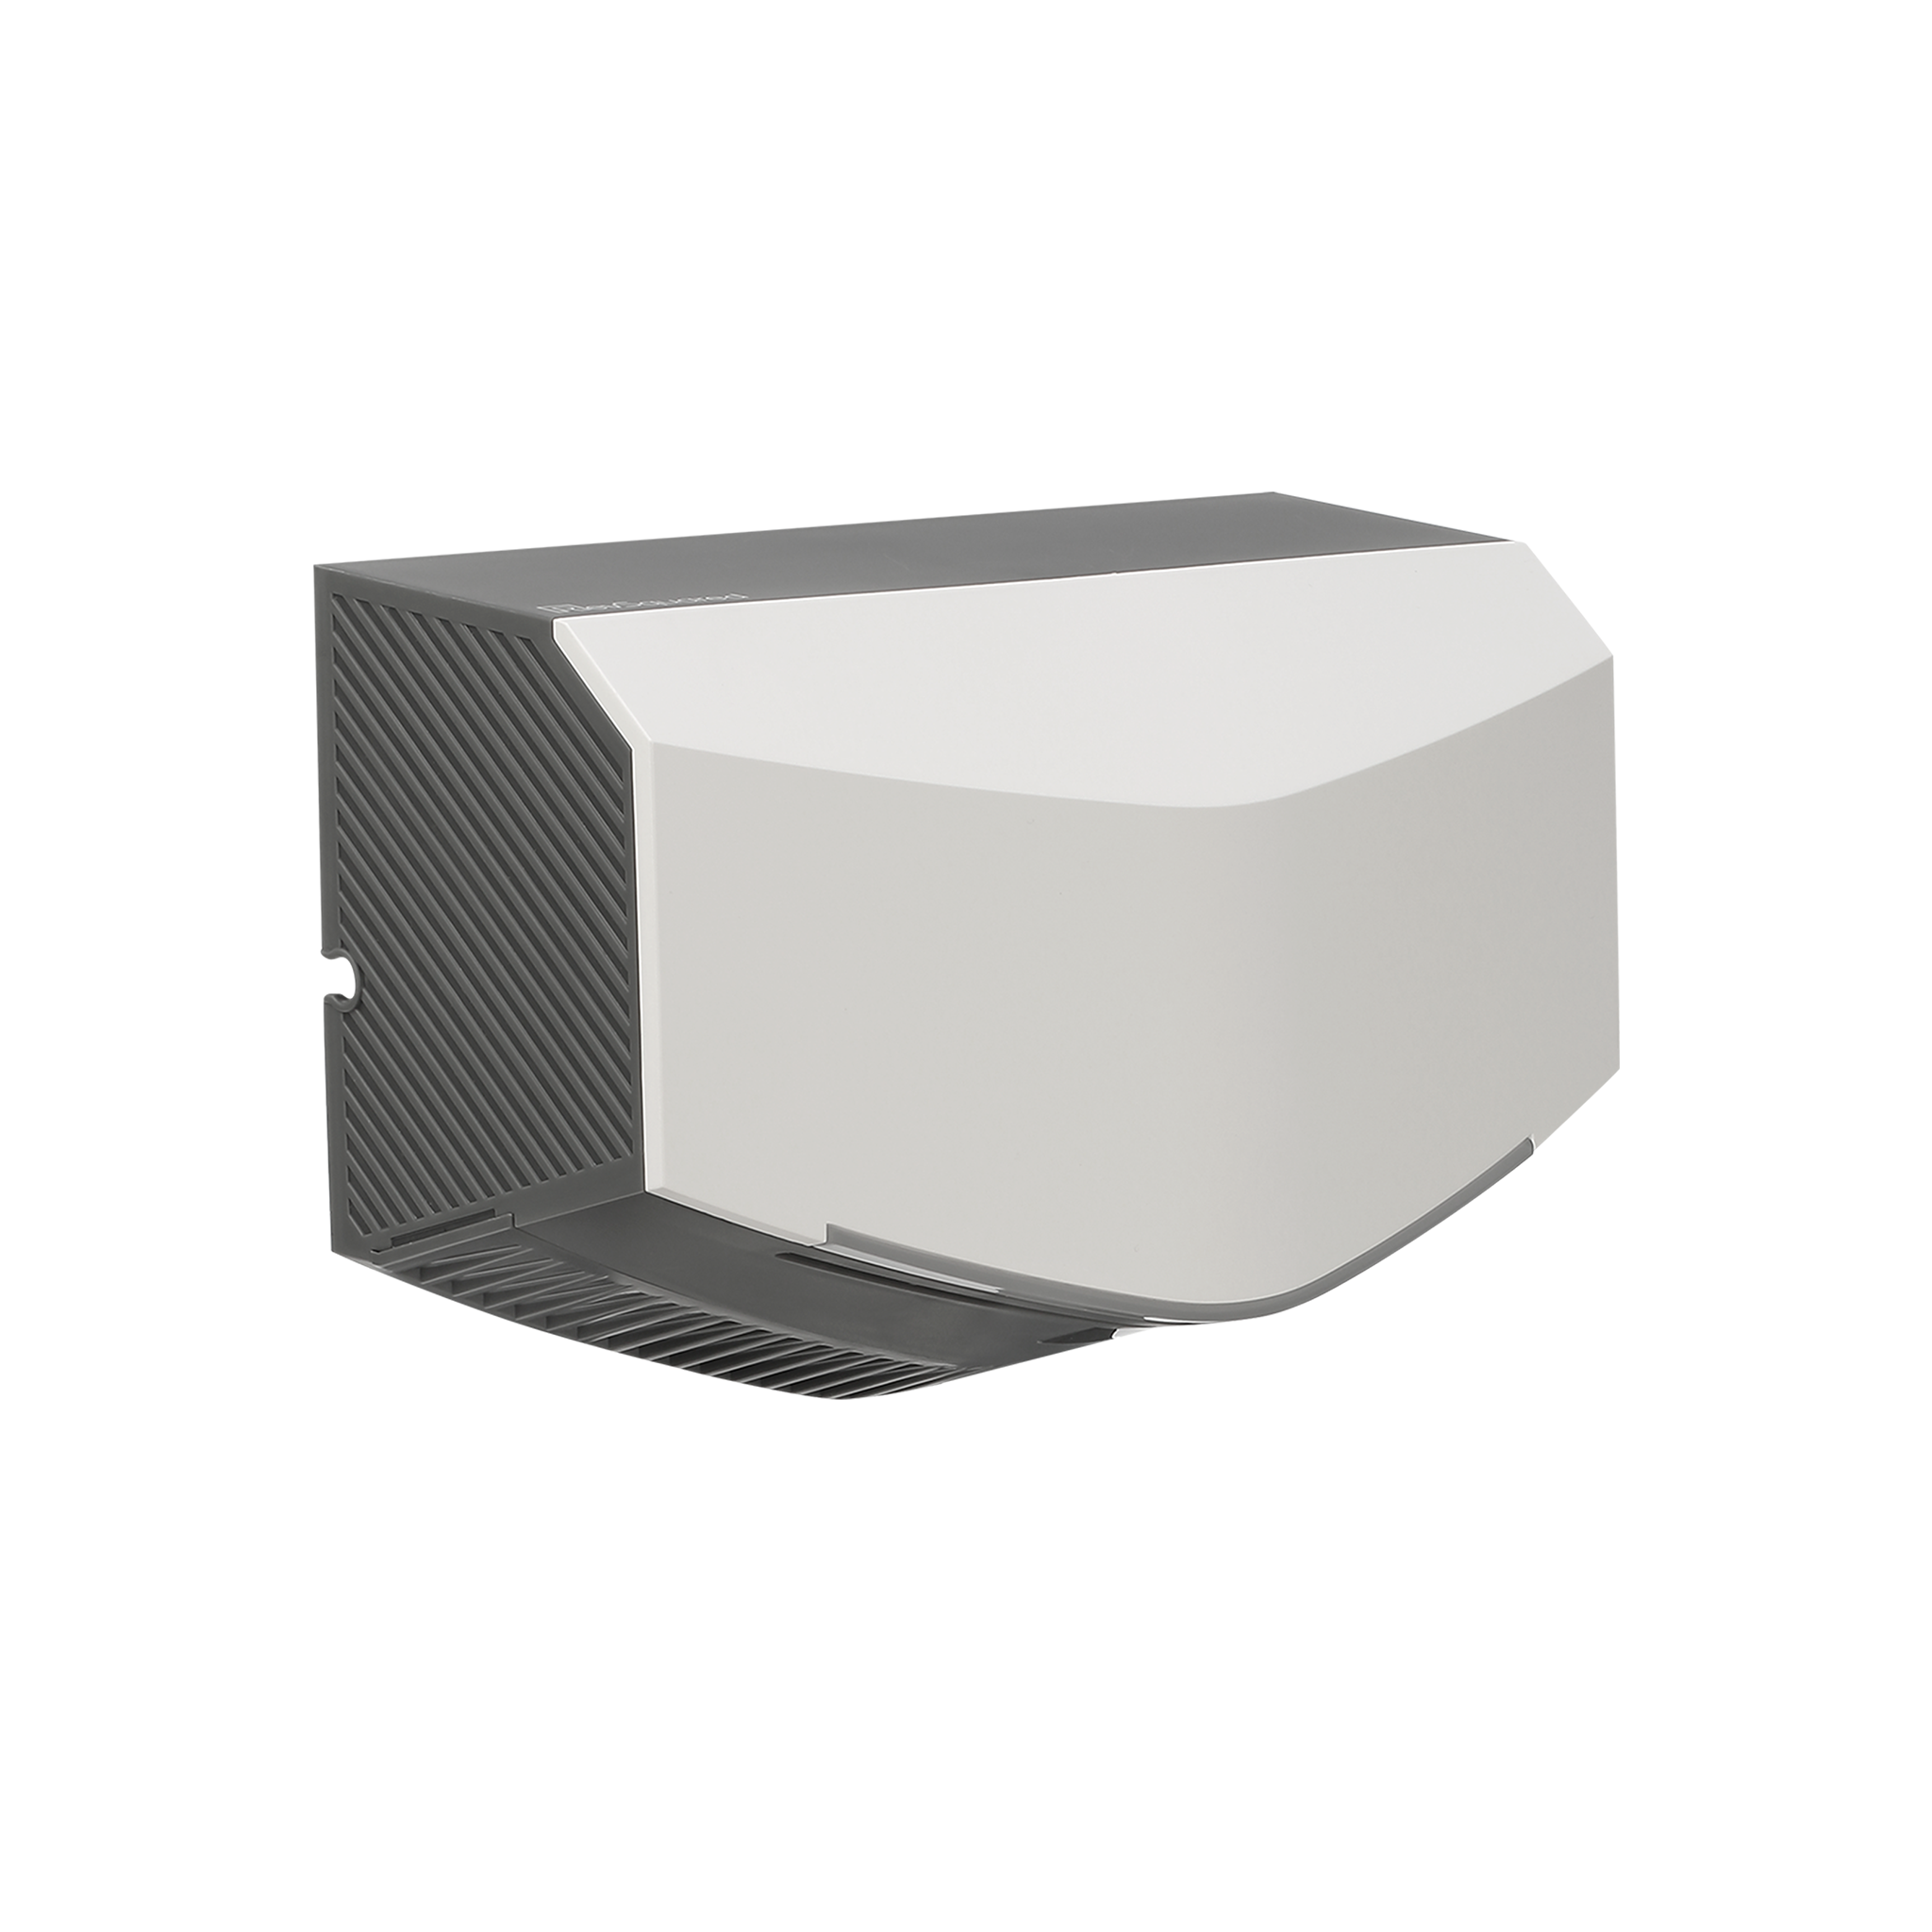 Side view of a white RevSquared HD350 compact hand dryer for commercial and residential spaces